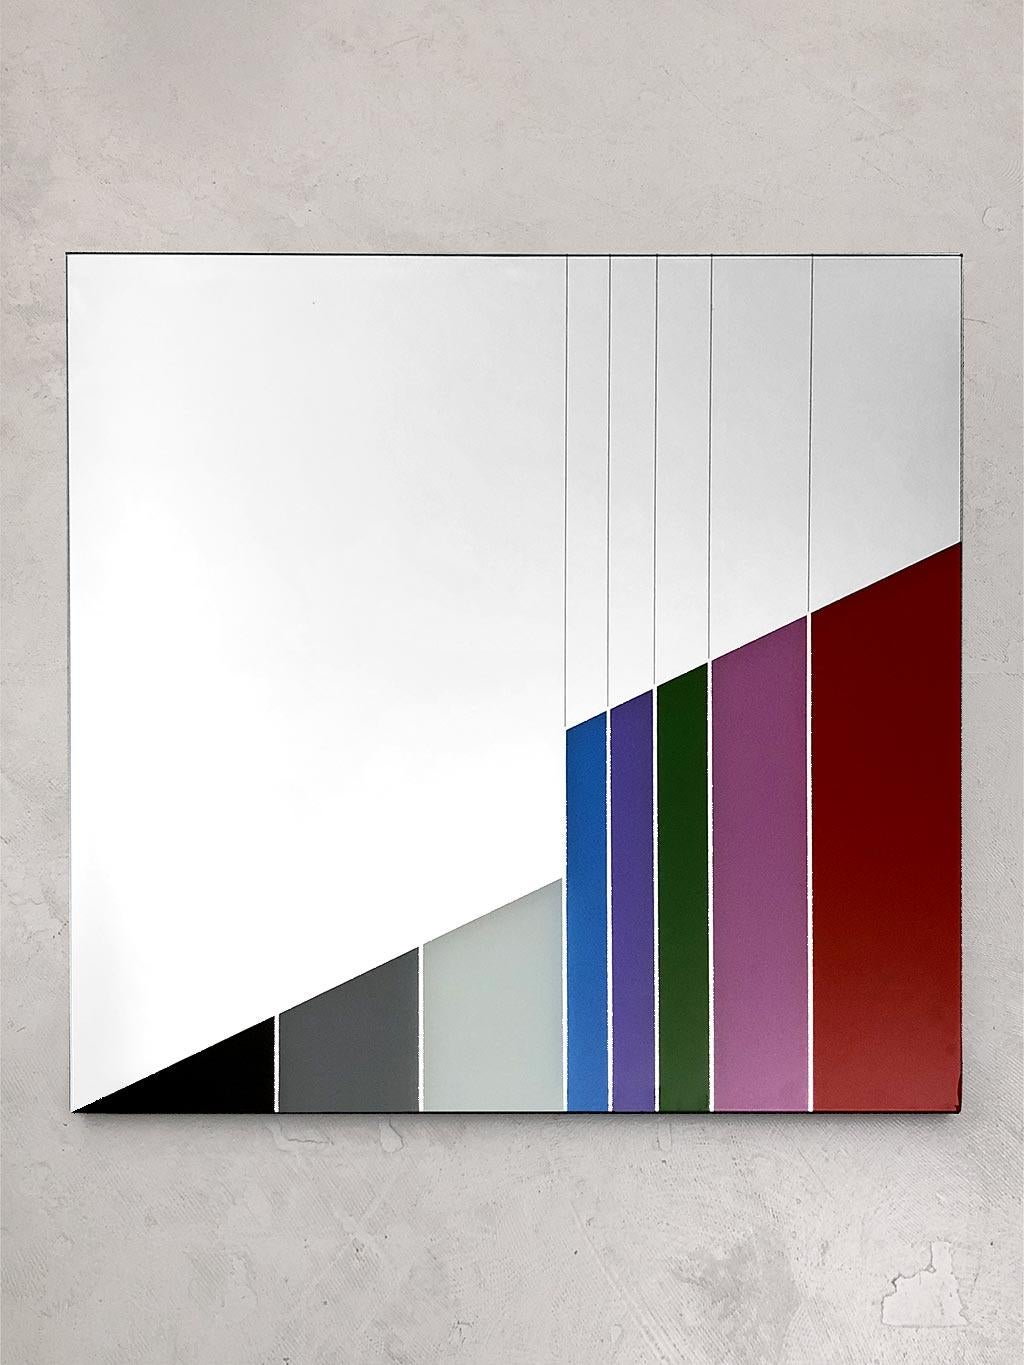 Wall Mirror by Eugenio Carmi for Morphos Collection, Acerbis International. Italy 1980. Polychrome silk-screened. Very good conditions, imperceptible scratch in one corner due to age and use (see zoomed picture).

dim. 90 x 90 cm.